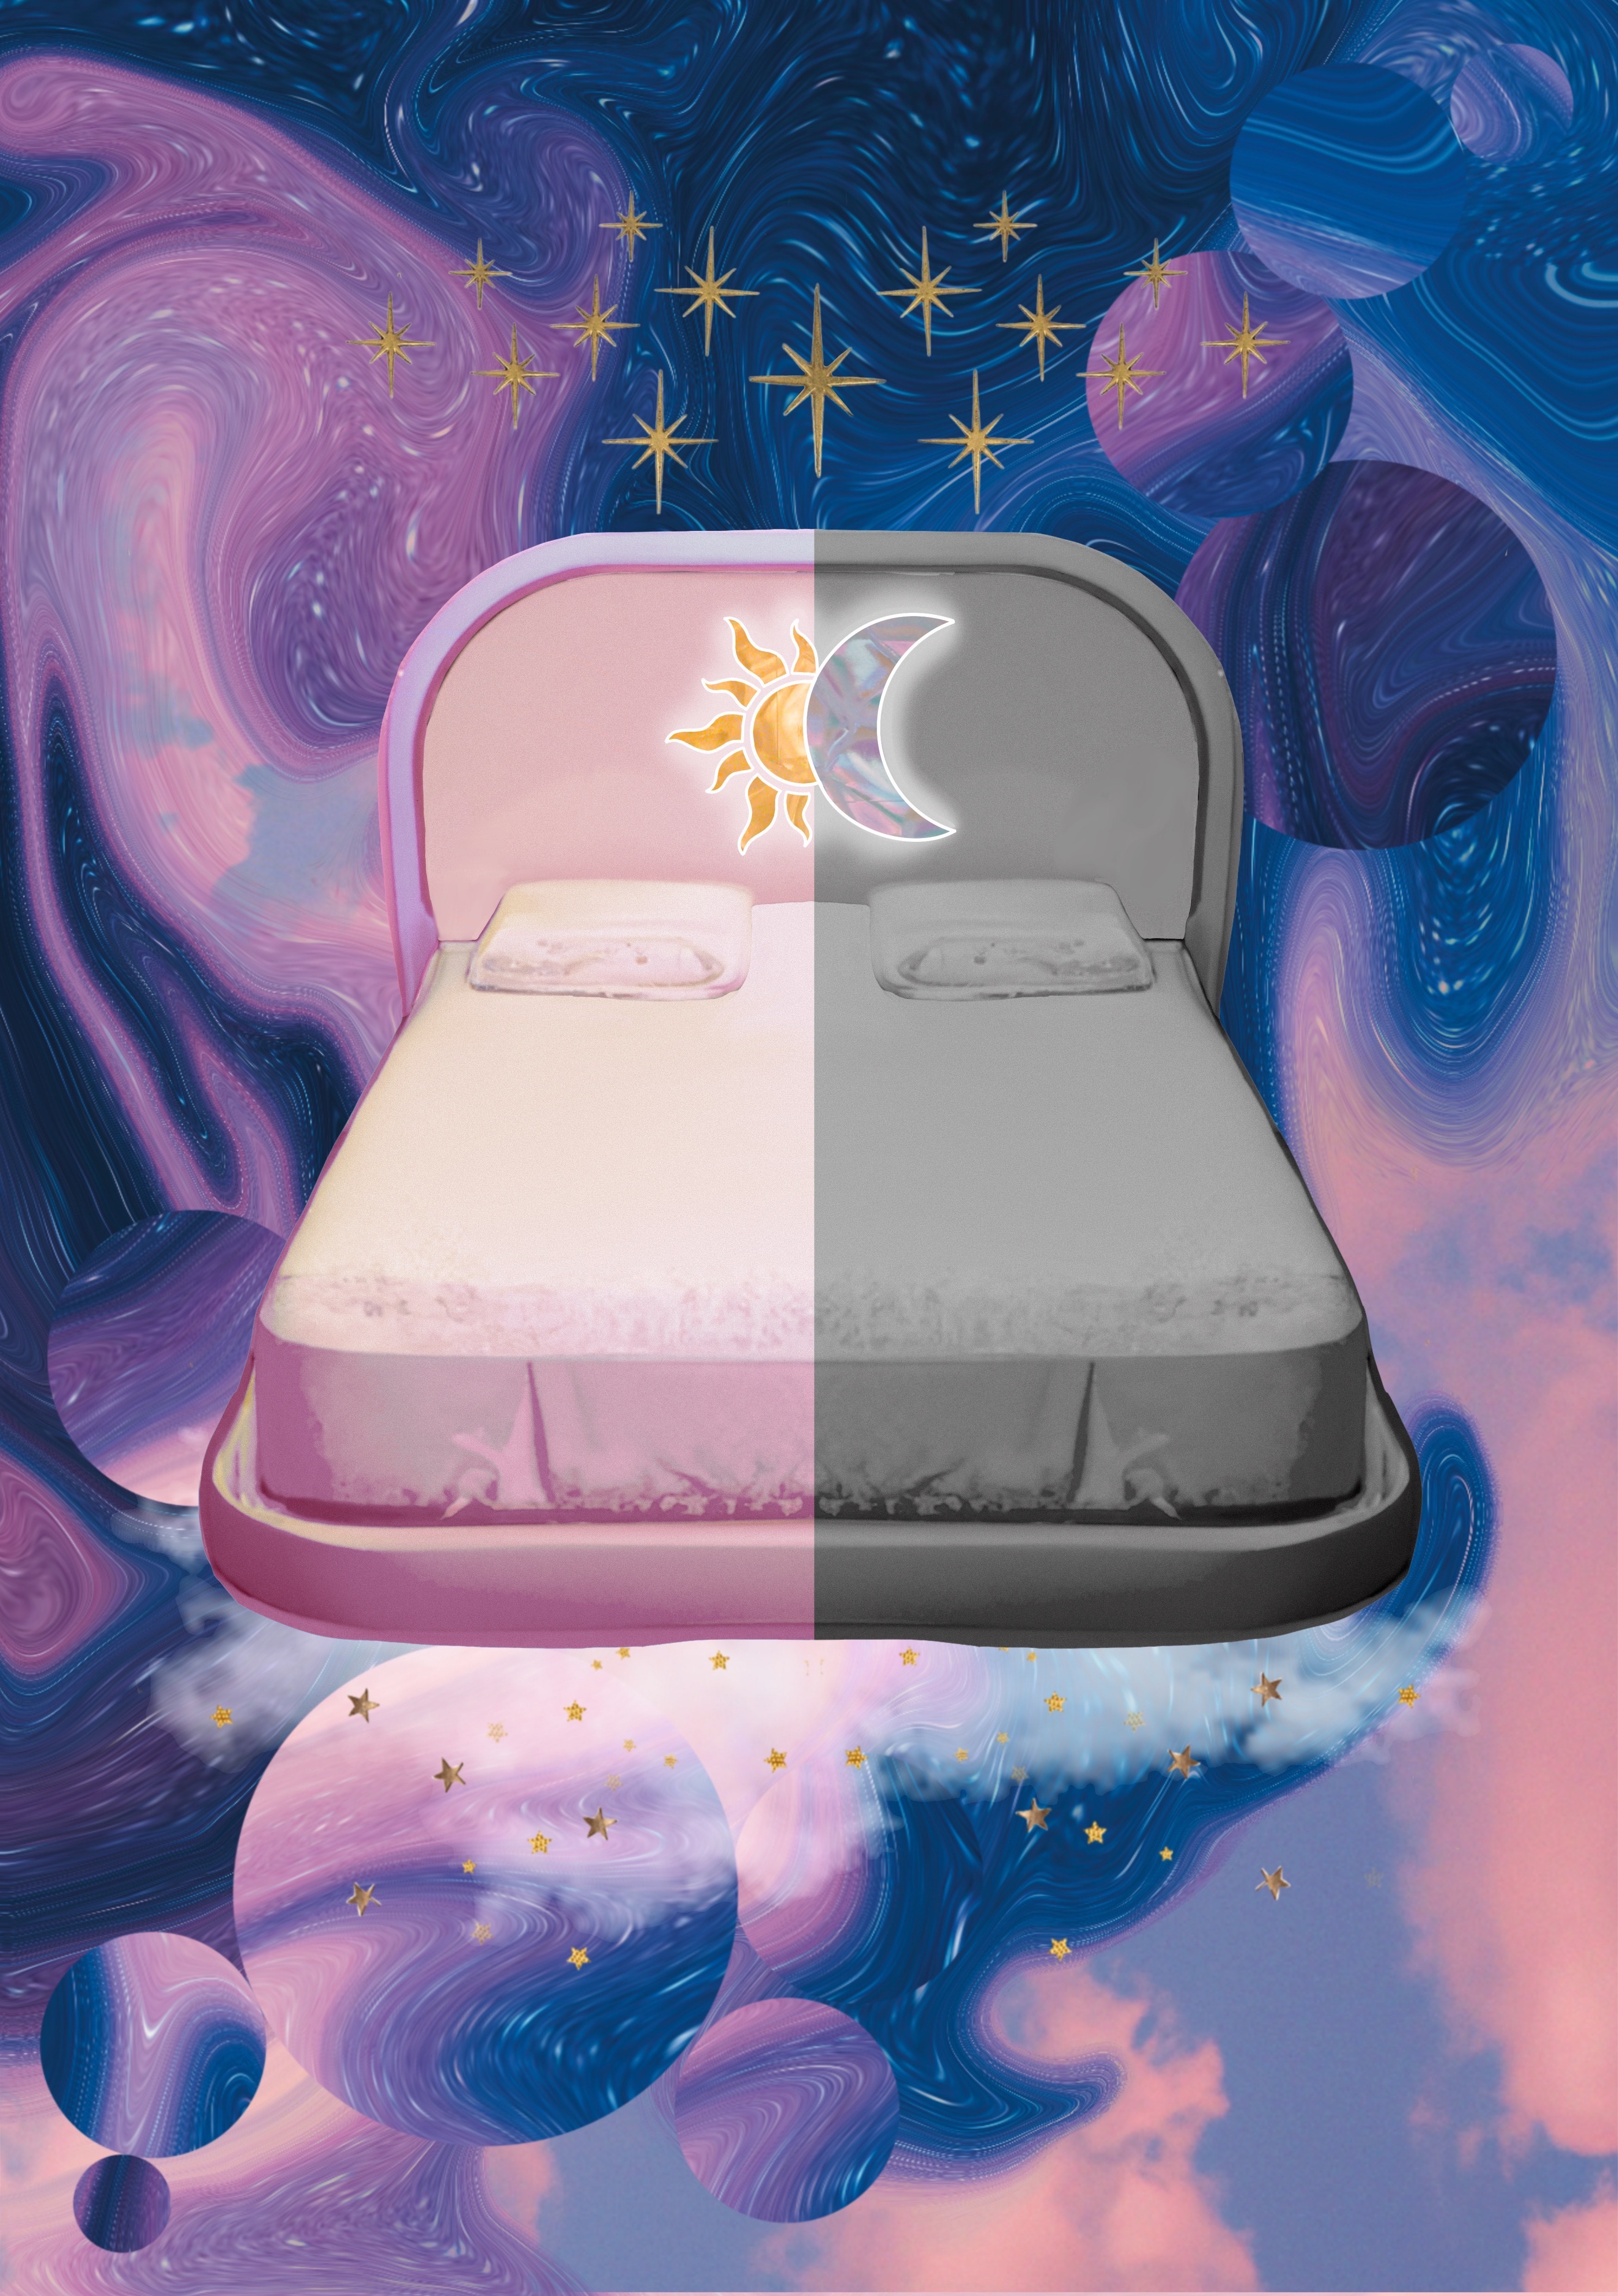 Art piece with colourful image of a bed